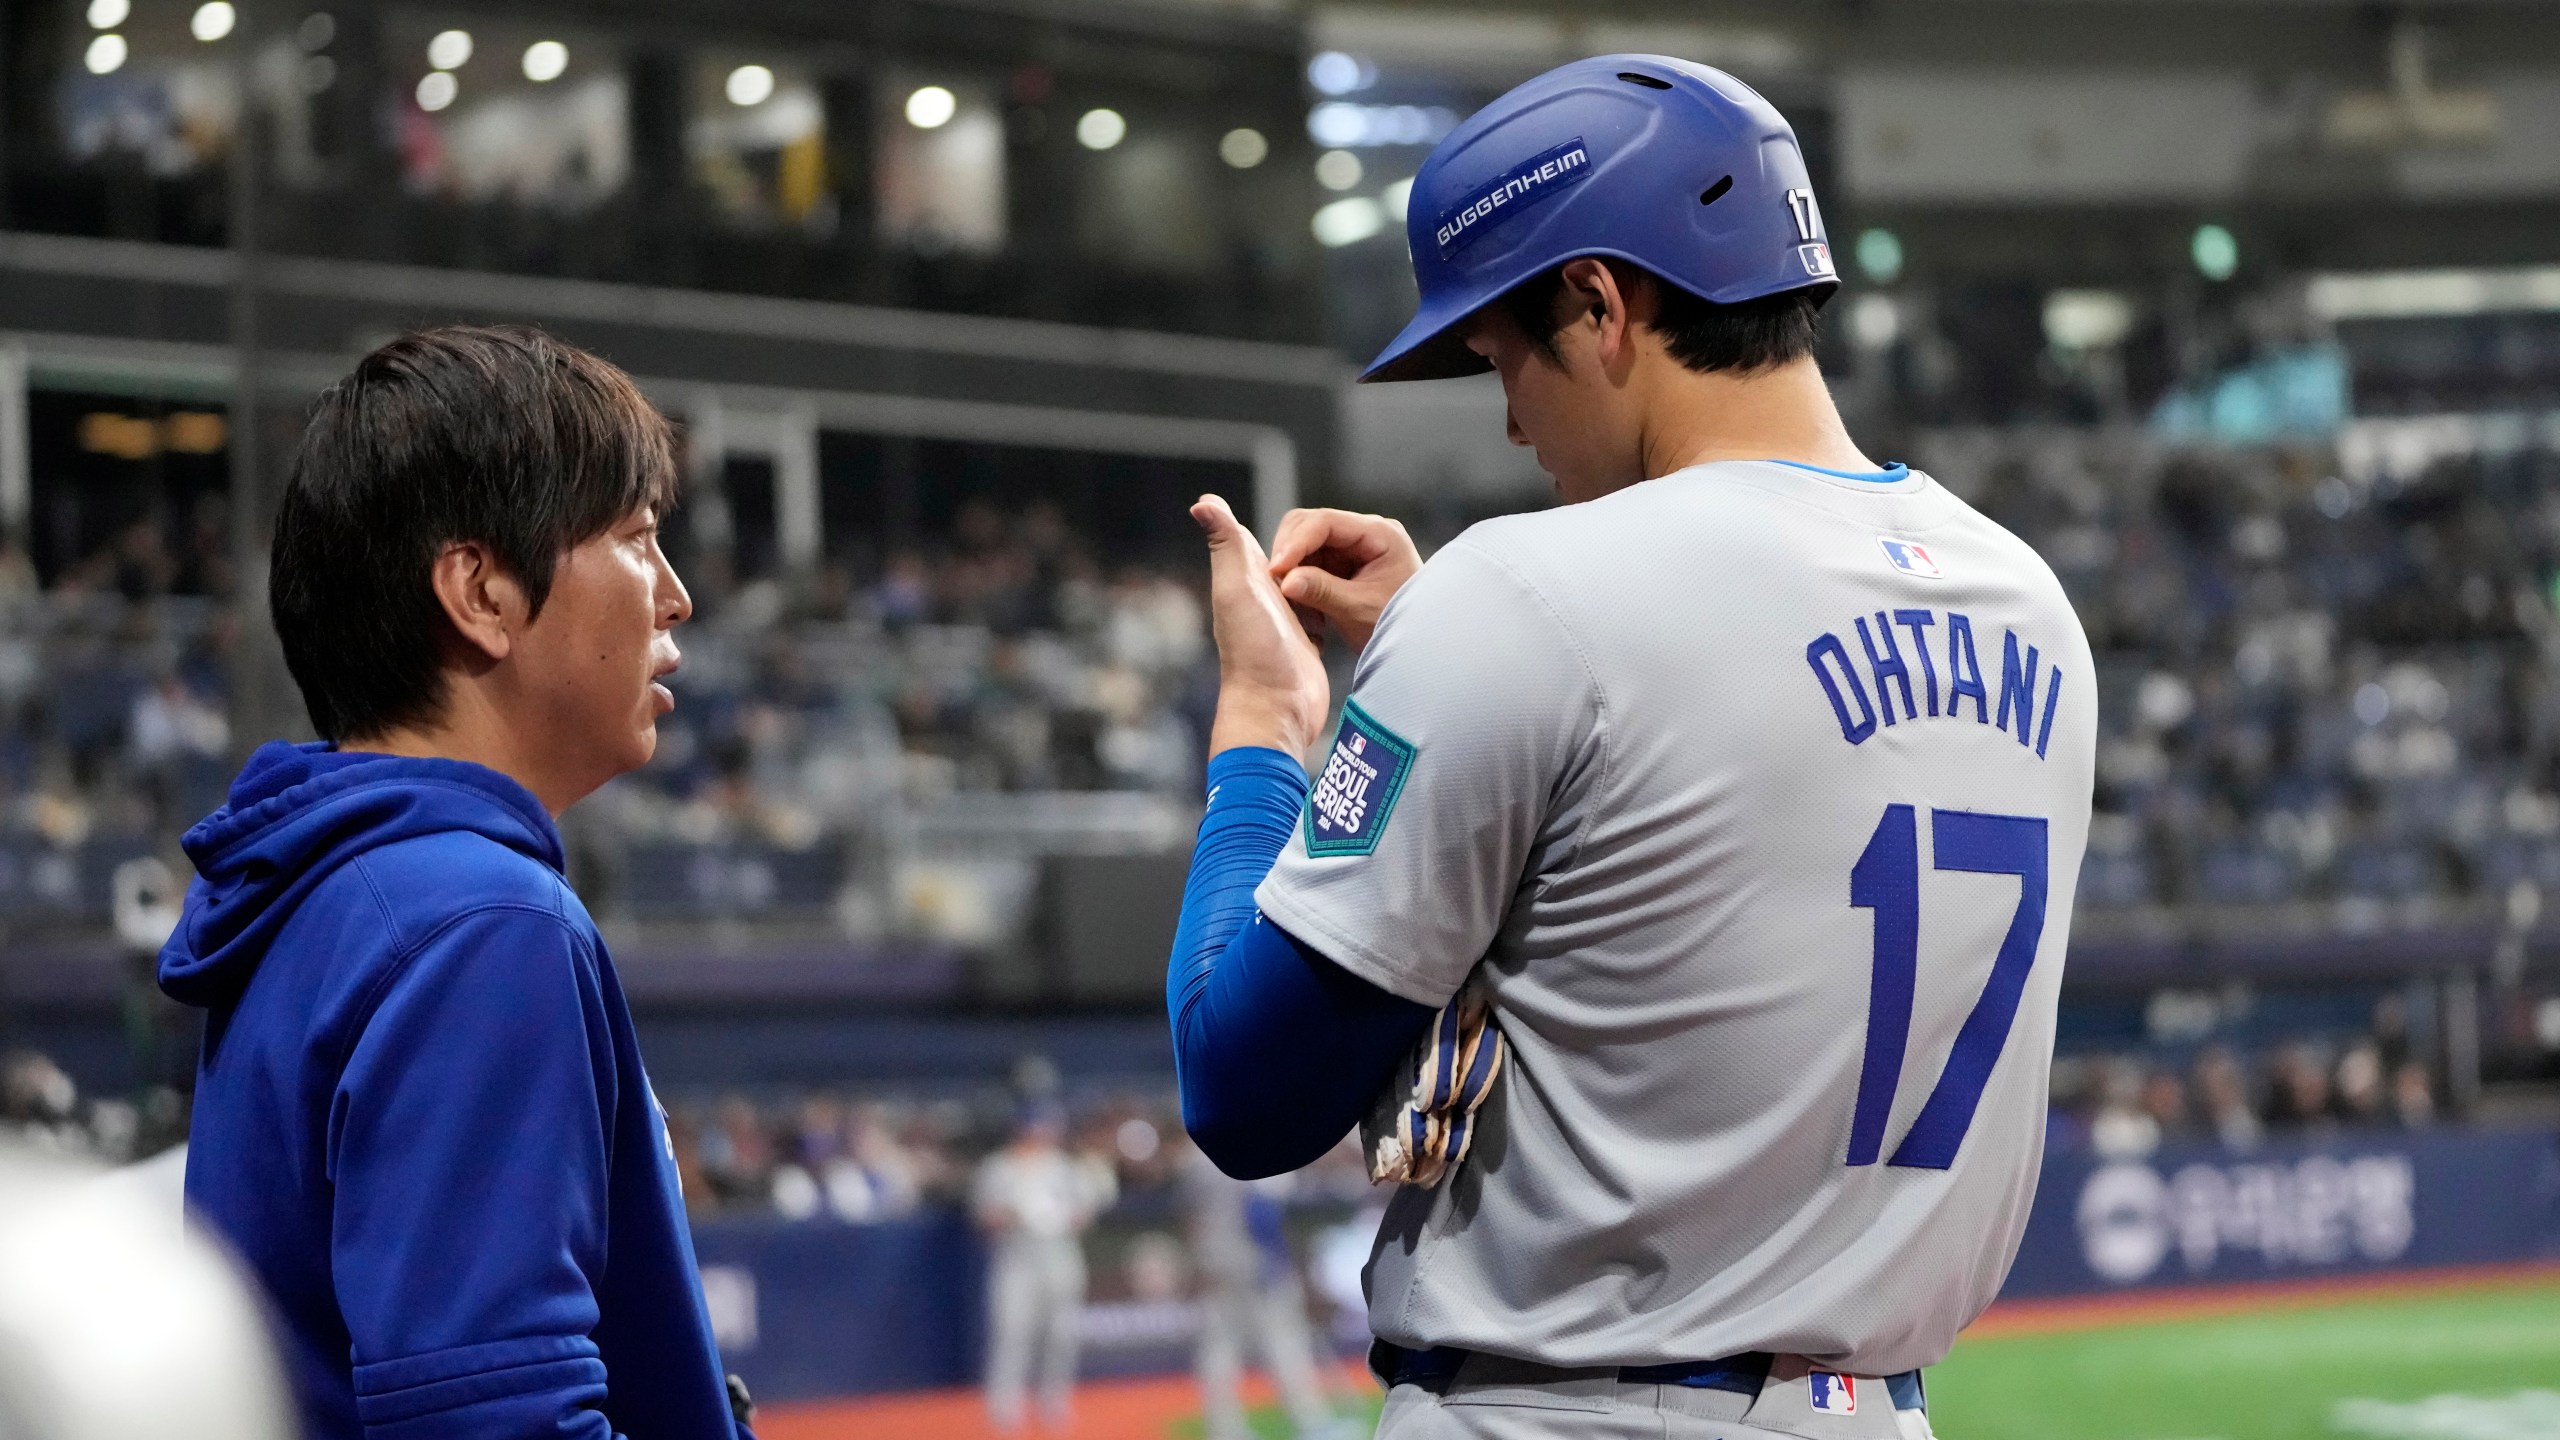 Los Angeles Dodgers designated hitter Shohei Ohtani, right, talks to his interpreter Ippei Mizuhara during the fifth inning of an opening day baseball game against the San Diego Padres at the Gocheok Sky Dome in Seoul, South Korea Wednesday, March 20, 2024, in Seoul, South Korea. (AP Photo/Lee Jin-man)